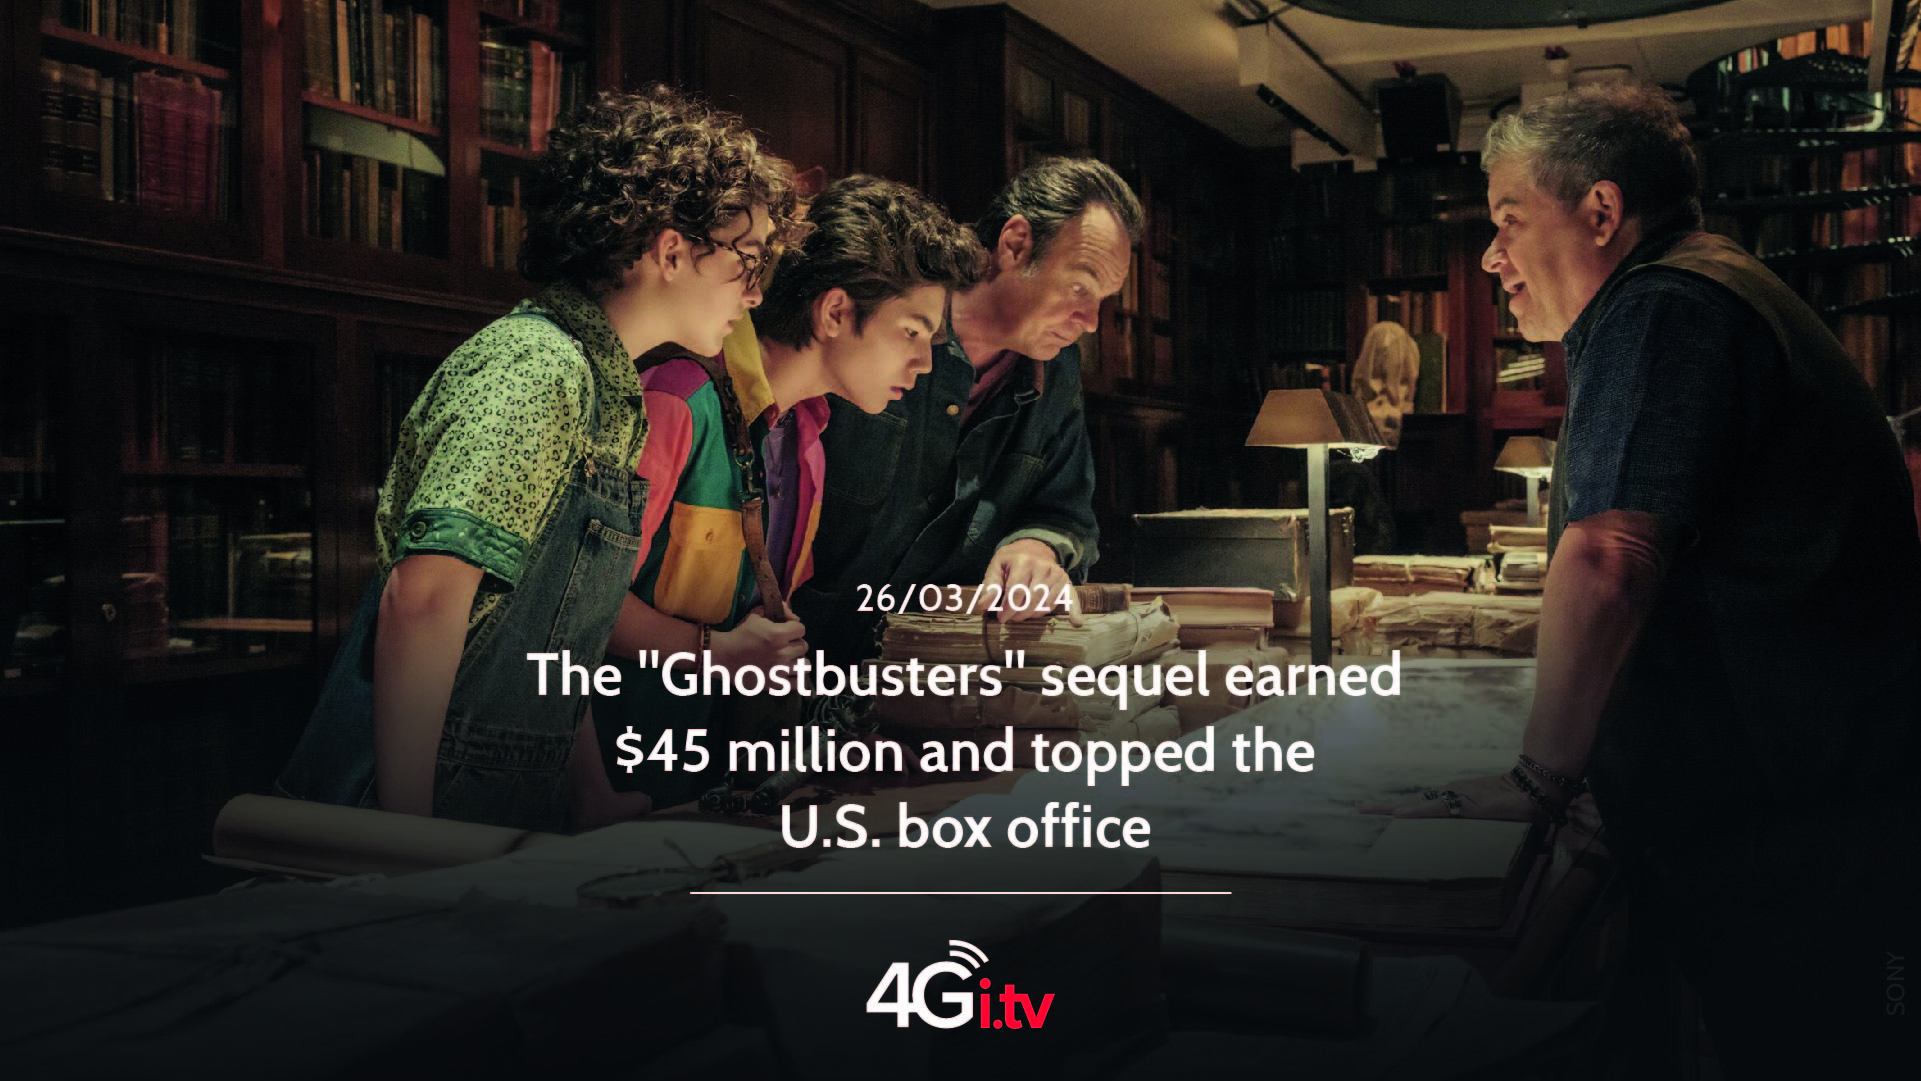 Подробнее о статье The “Ghostbusters” sequel earned $45 million and topped the U.S. box office 